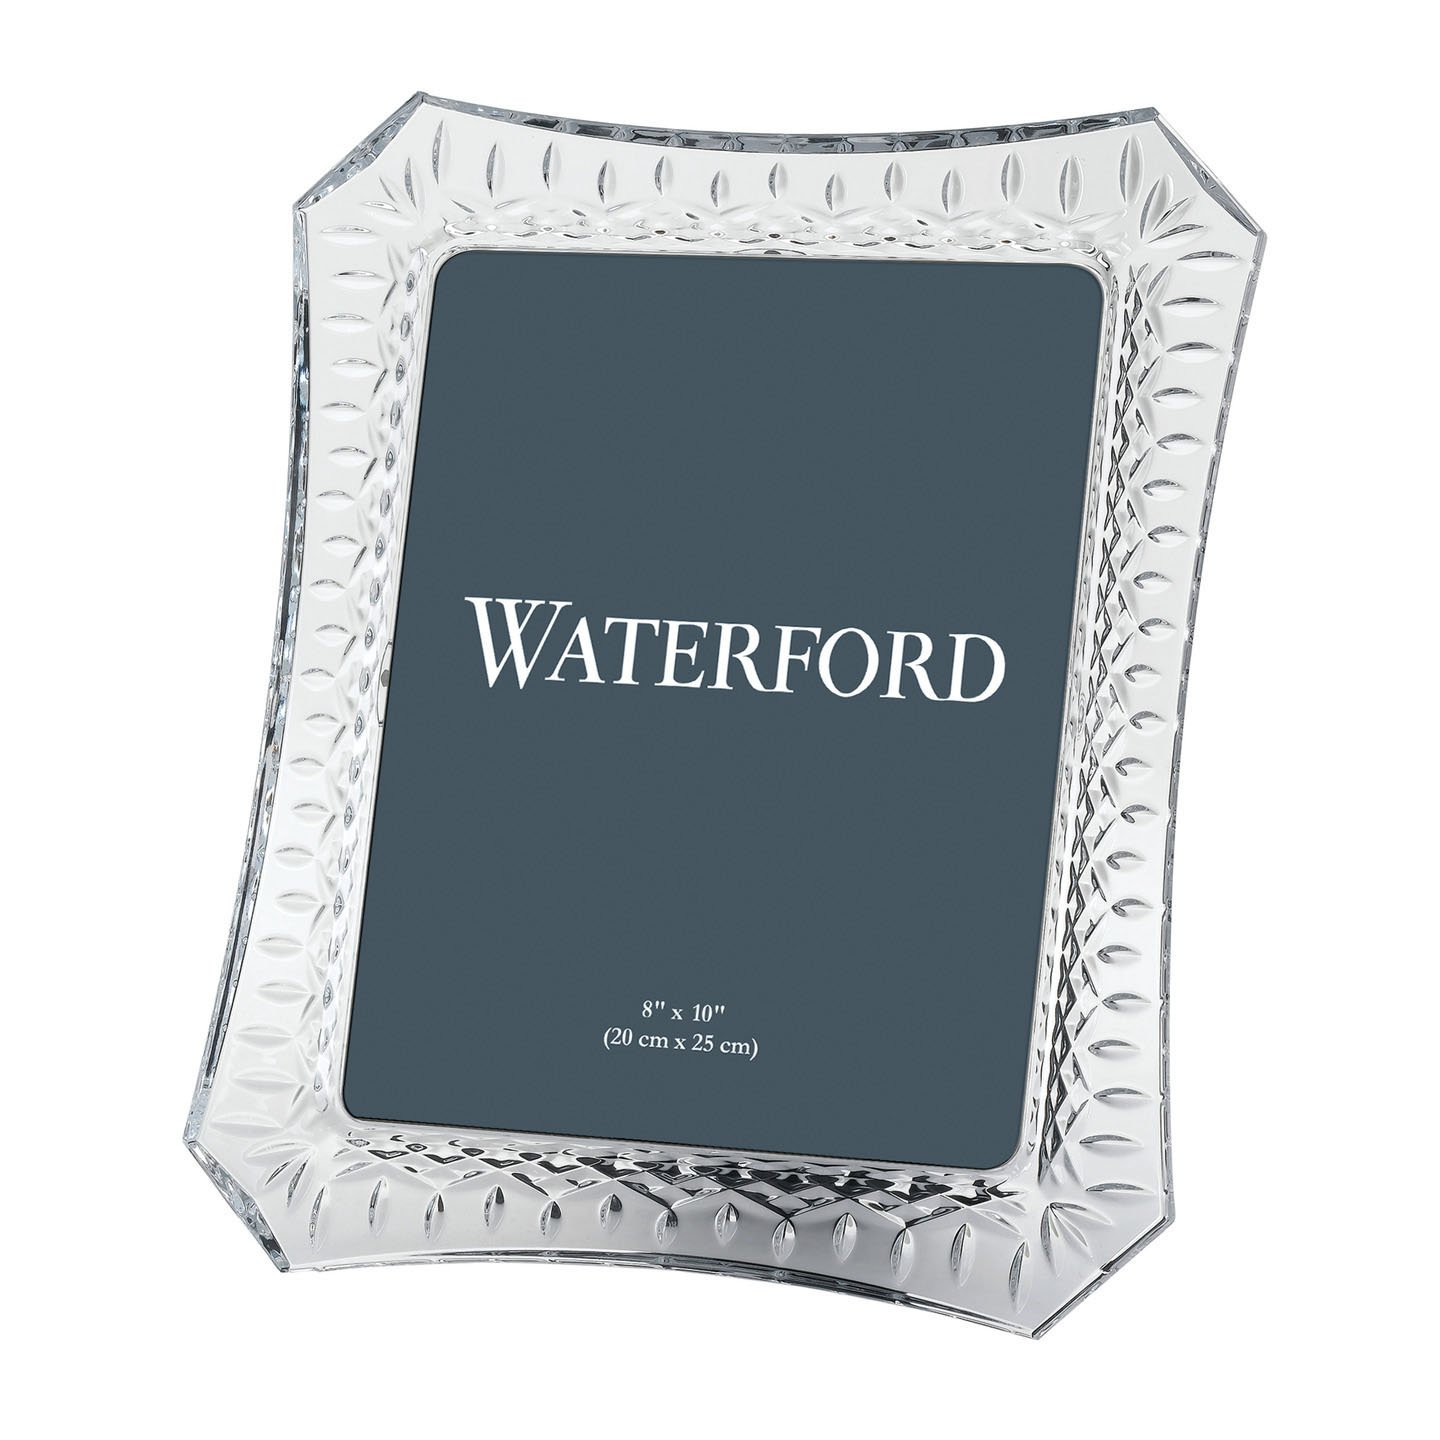 10 Nice Waterford Thistle Vase 2024 free download waterford thistle vase of lismore collection home gifts waterforda crystal with lismore photo frame photo 8x10inch